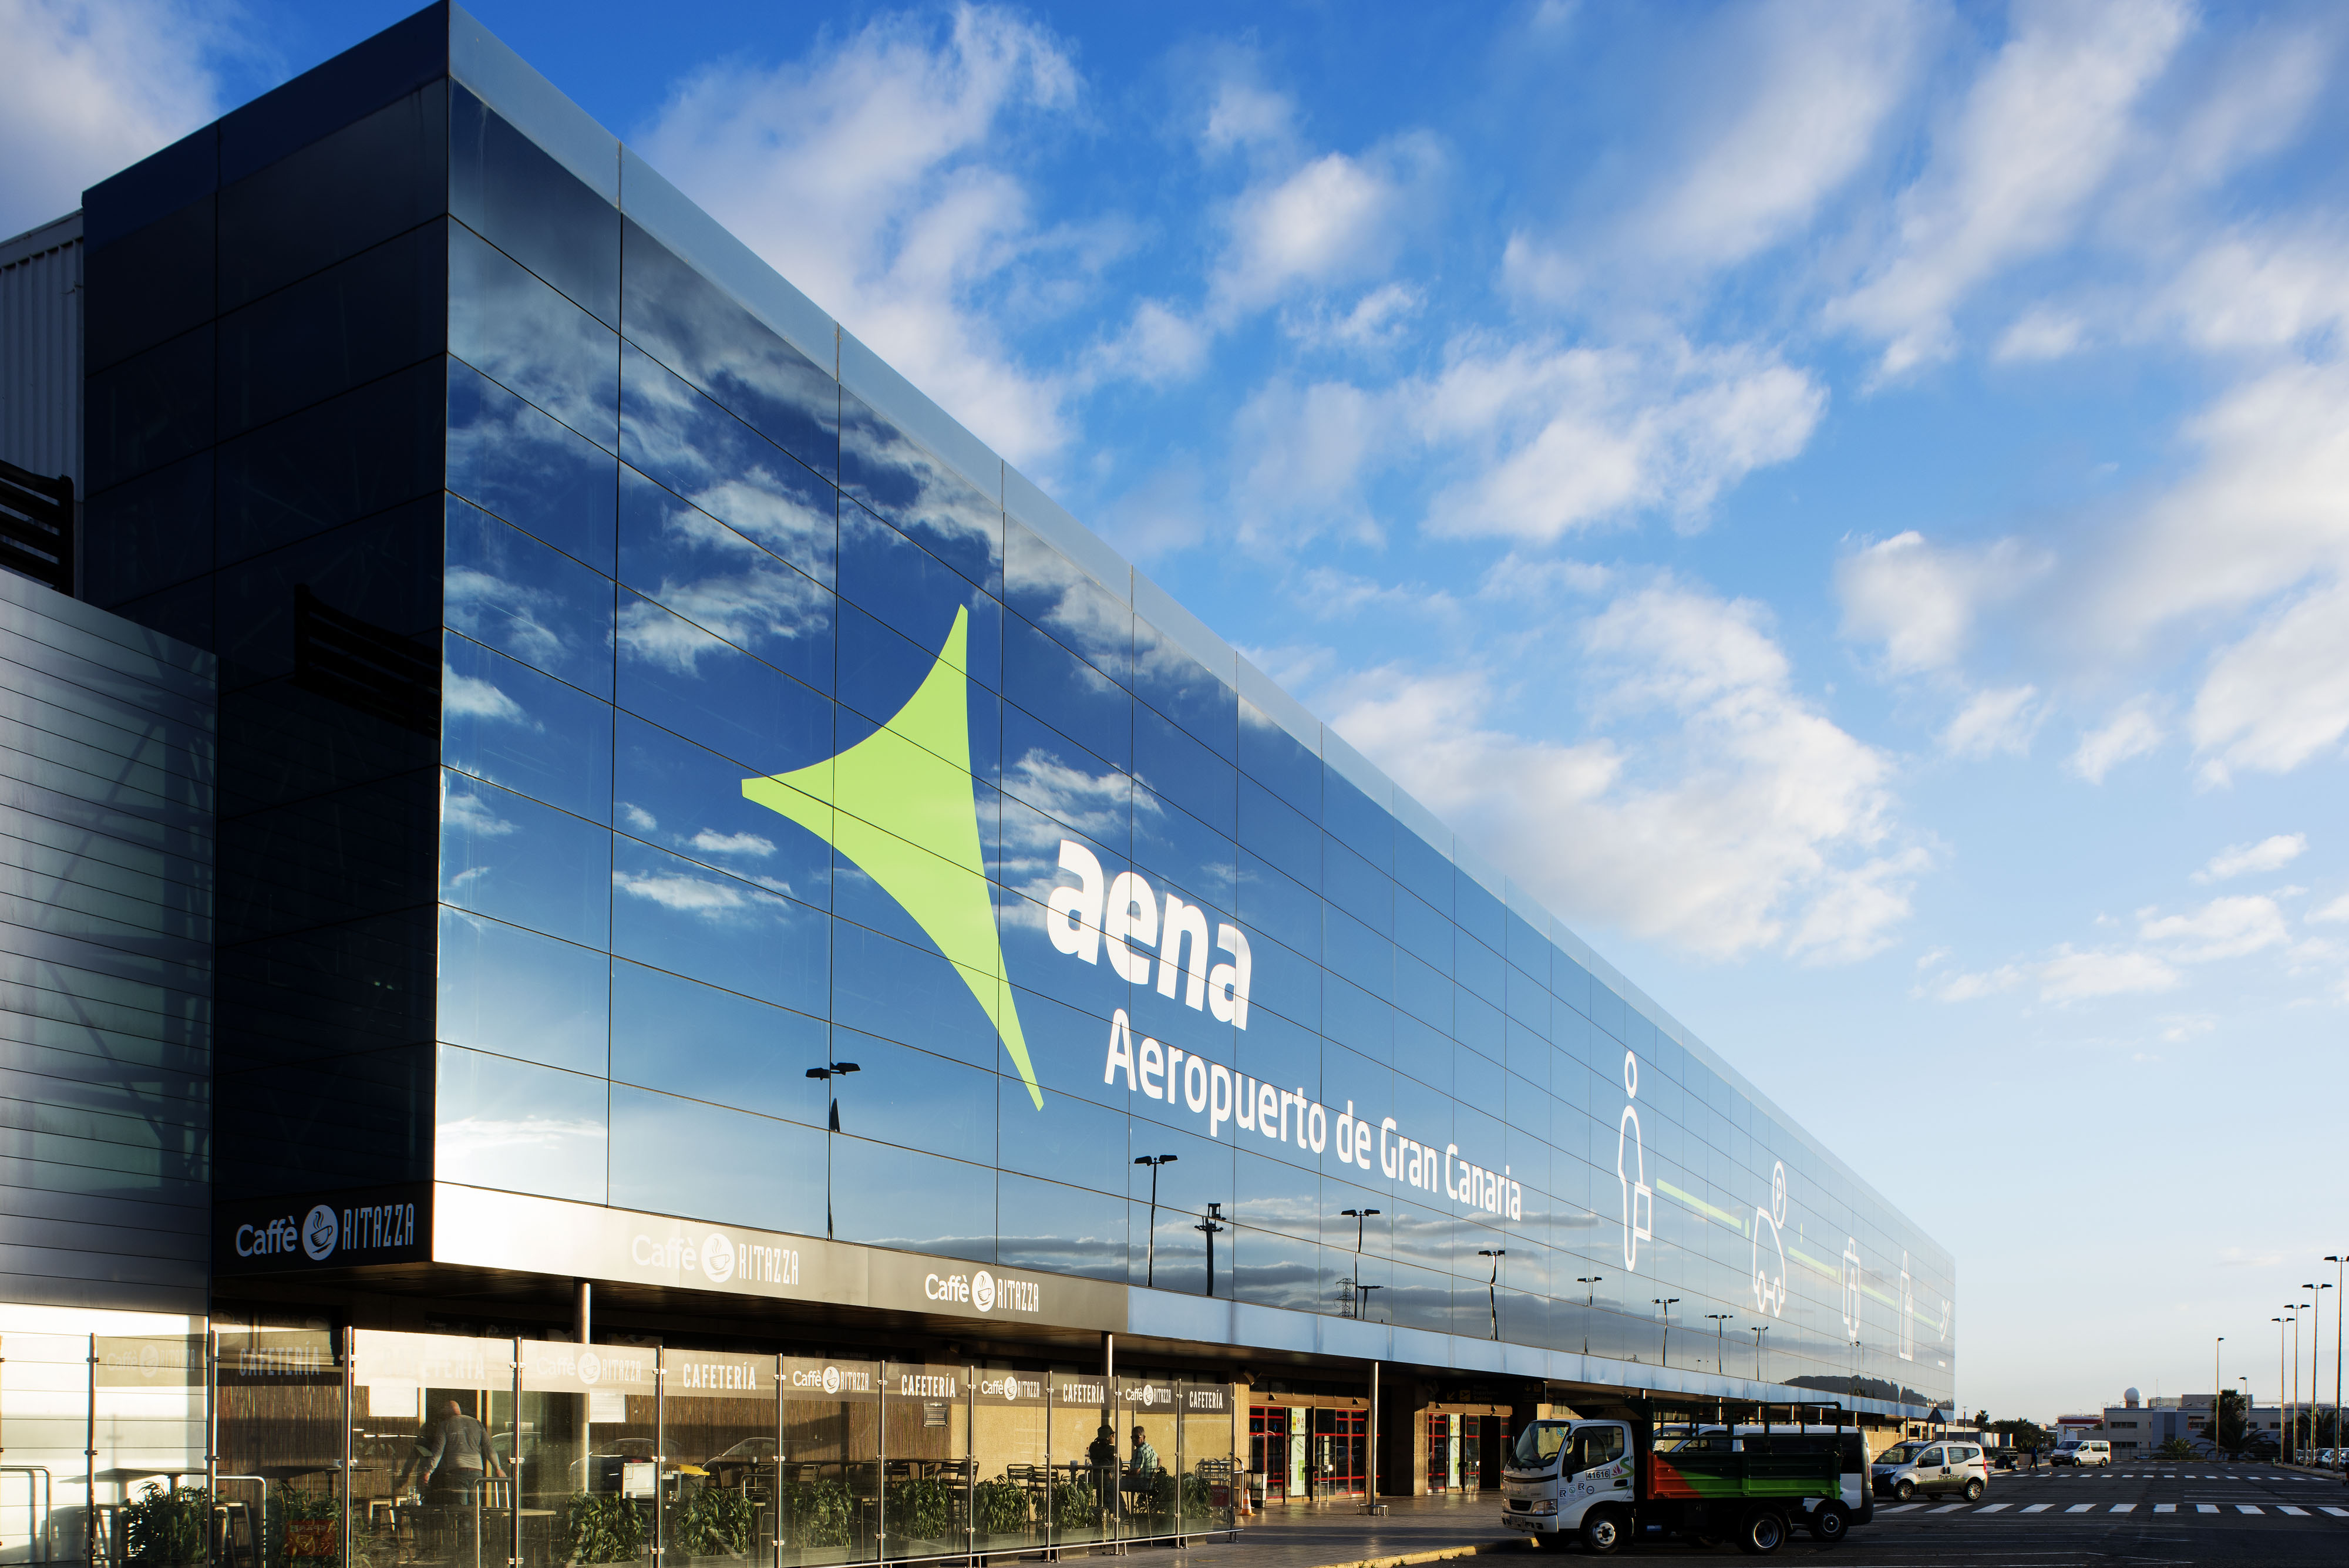 ParkVia now markets Aena’s entire portfolio of 32 Spanish airports through numerous consumer-facing channels